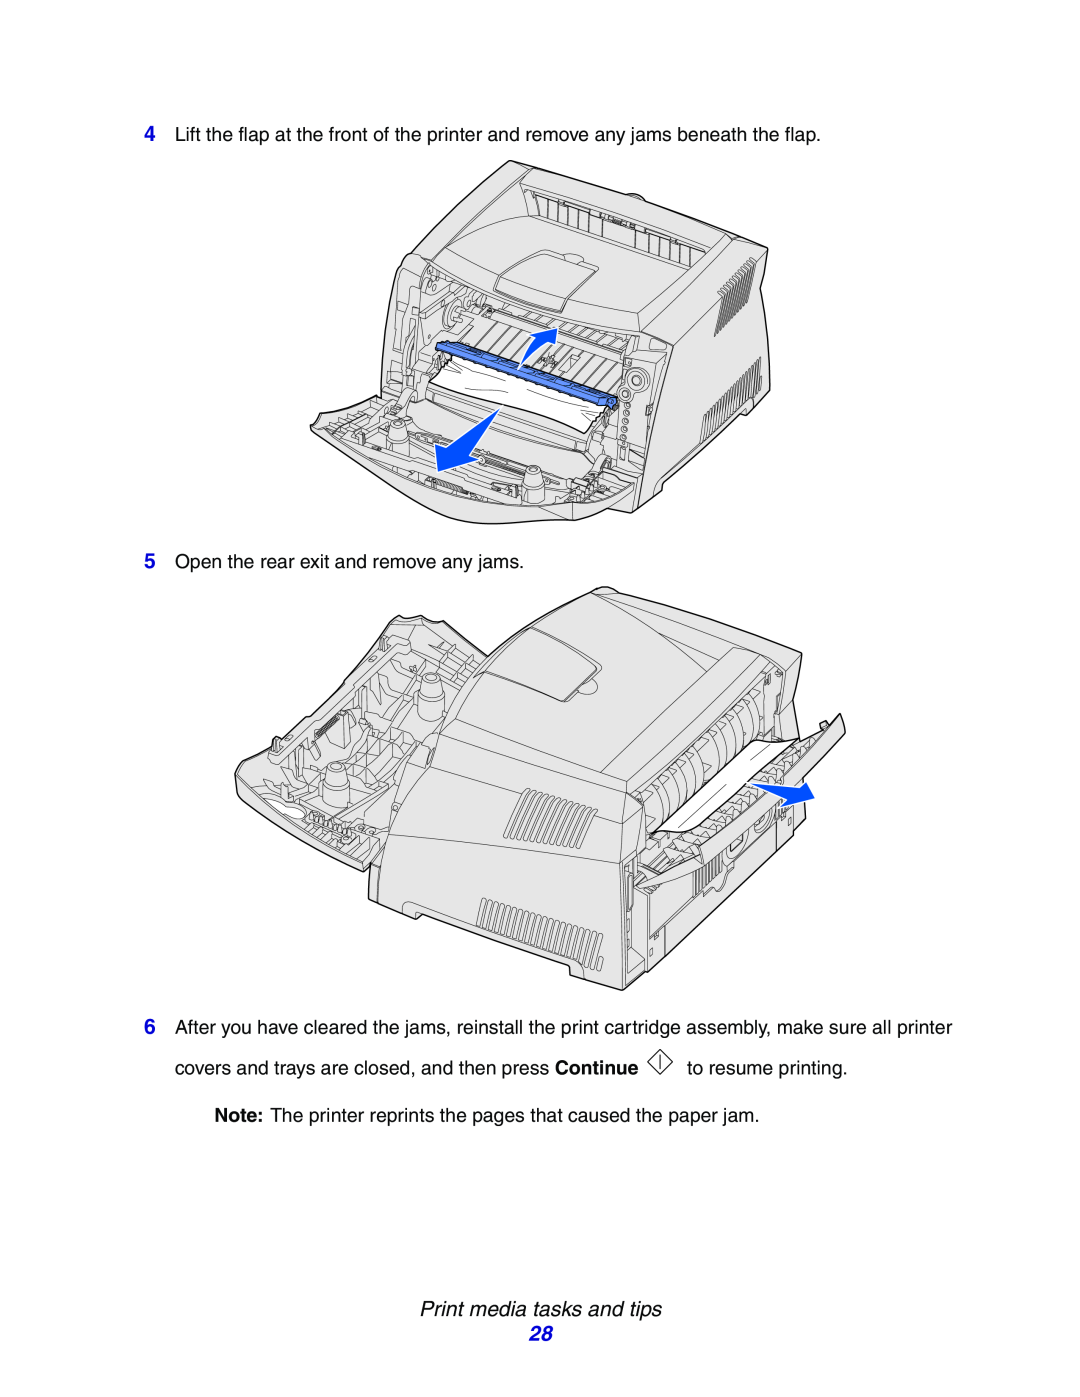 Lexmark E234N manual Print media tasks and tips, 5Open the rear exit and remove any jams 